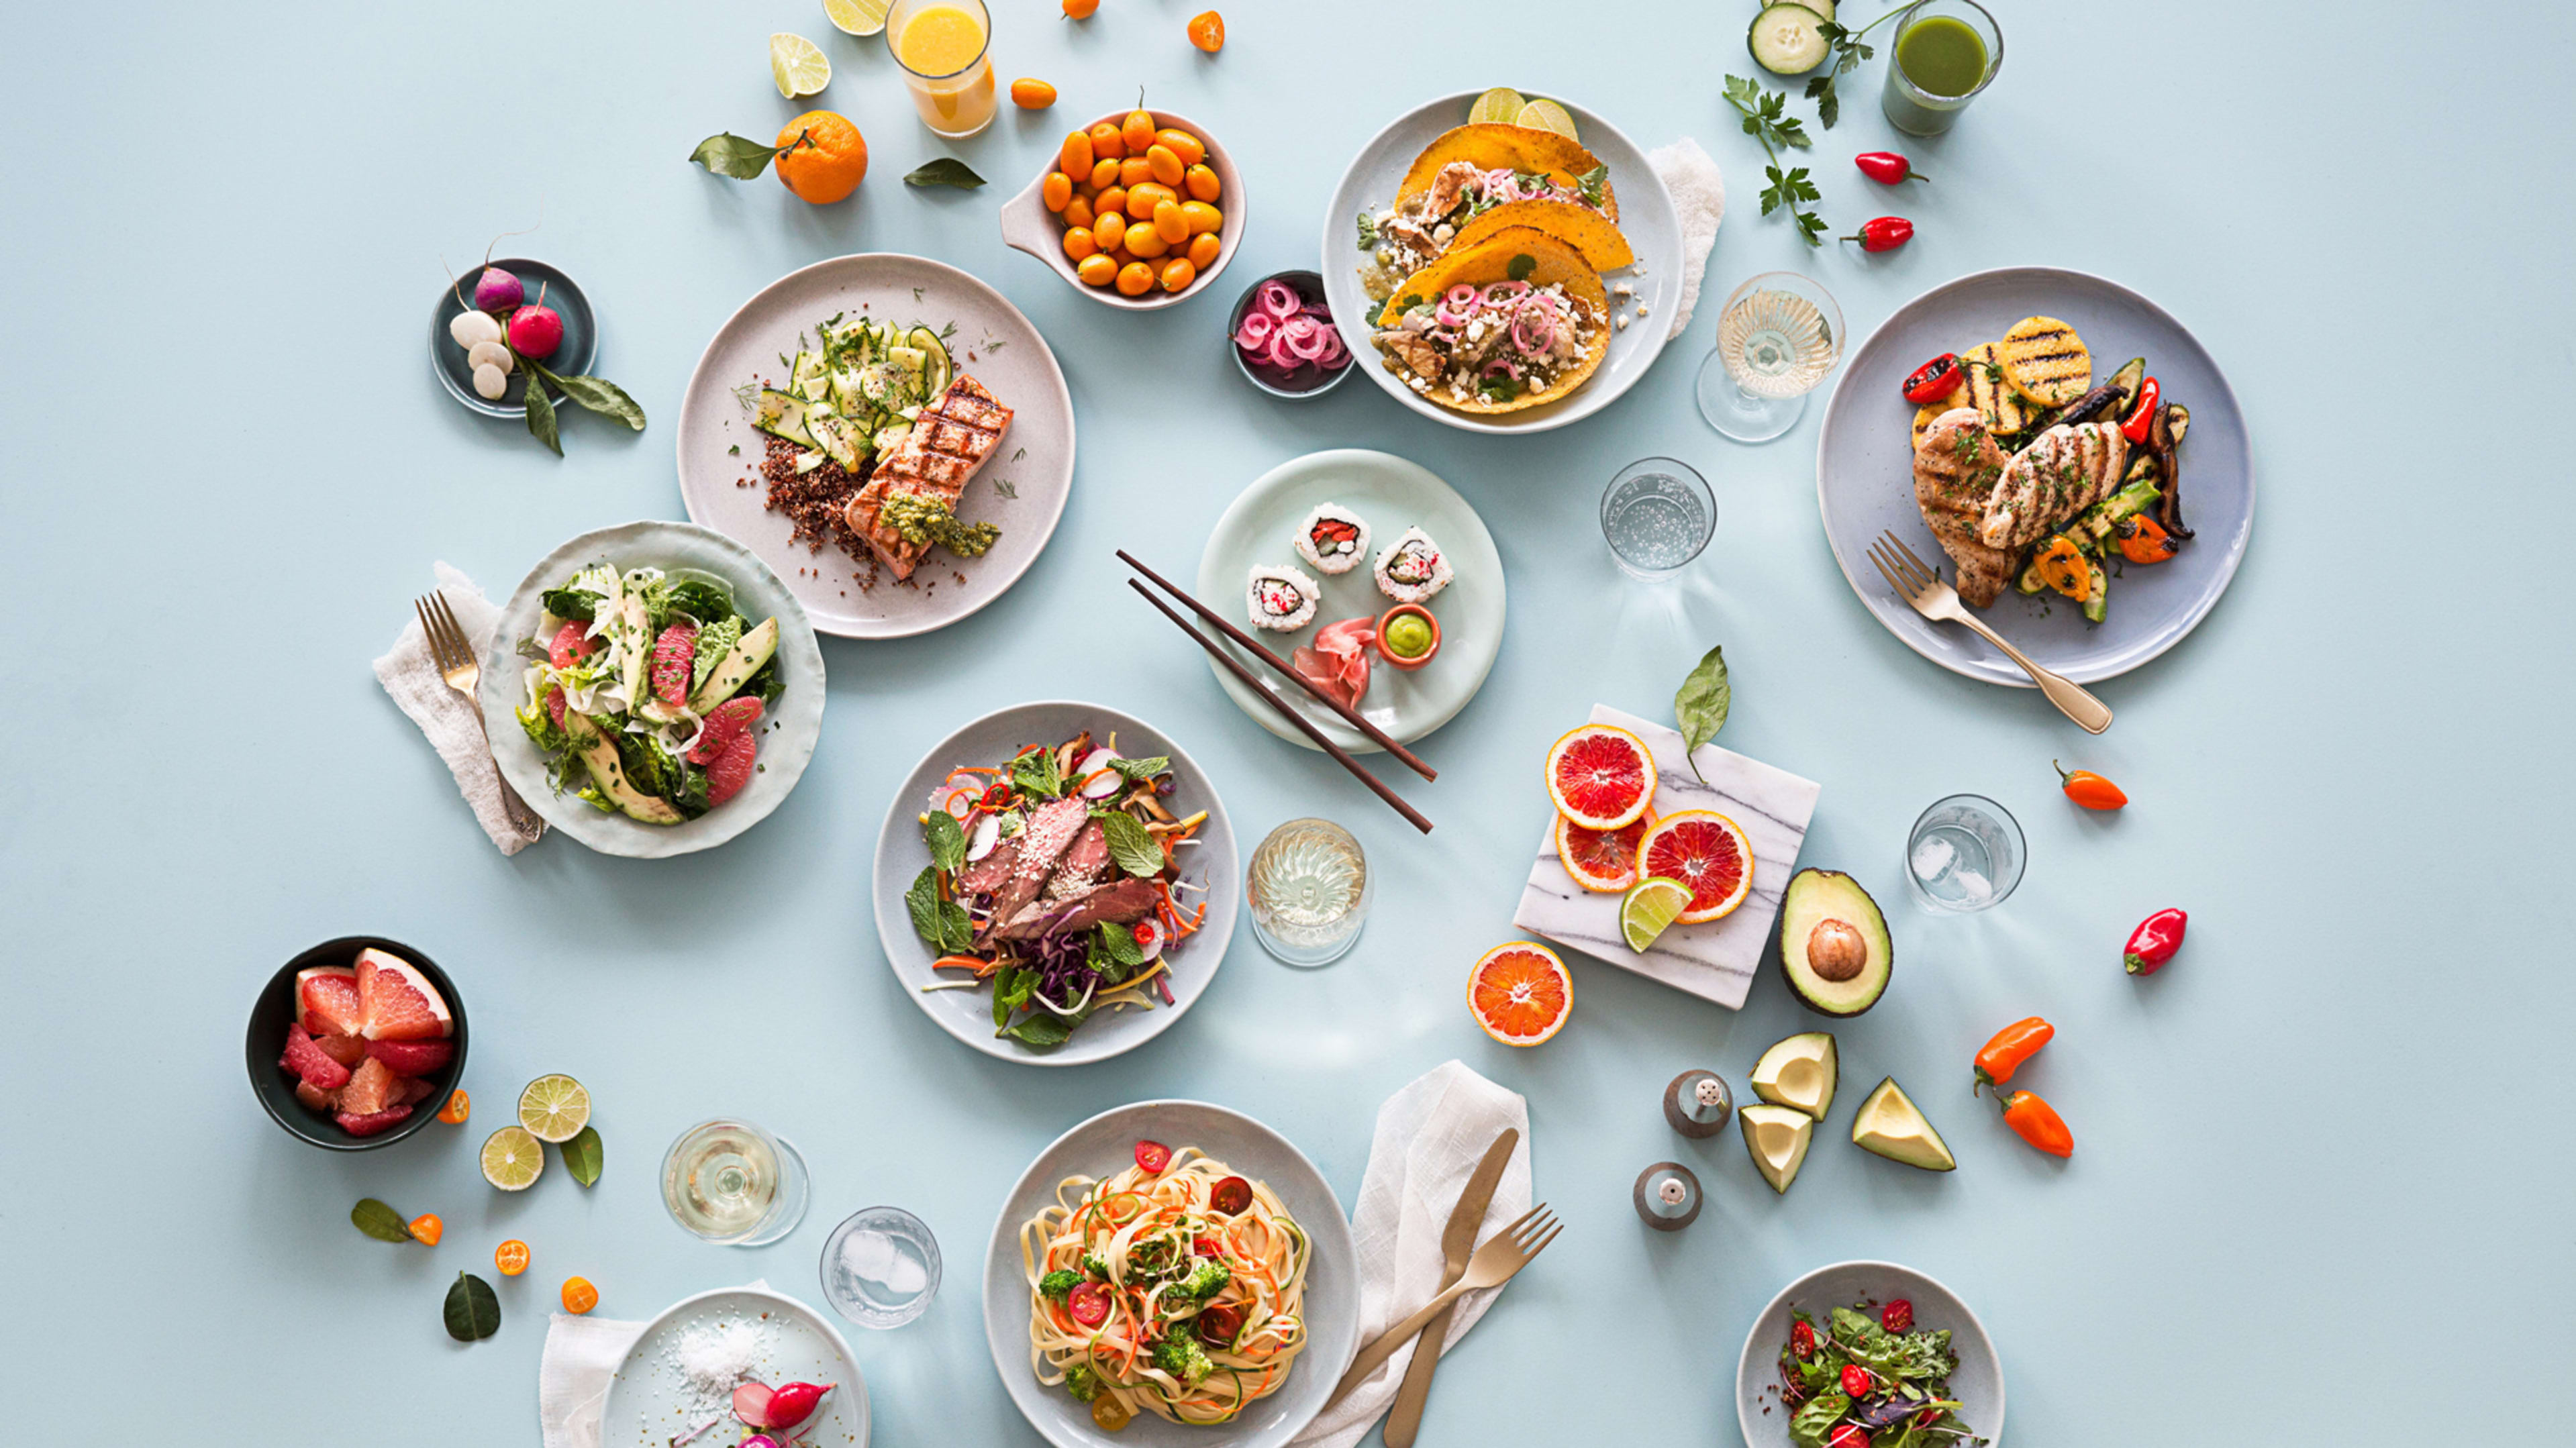 How Munchery’s high hopes led to its decline and fall